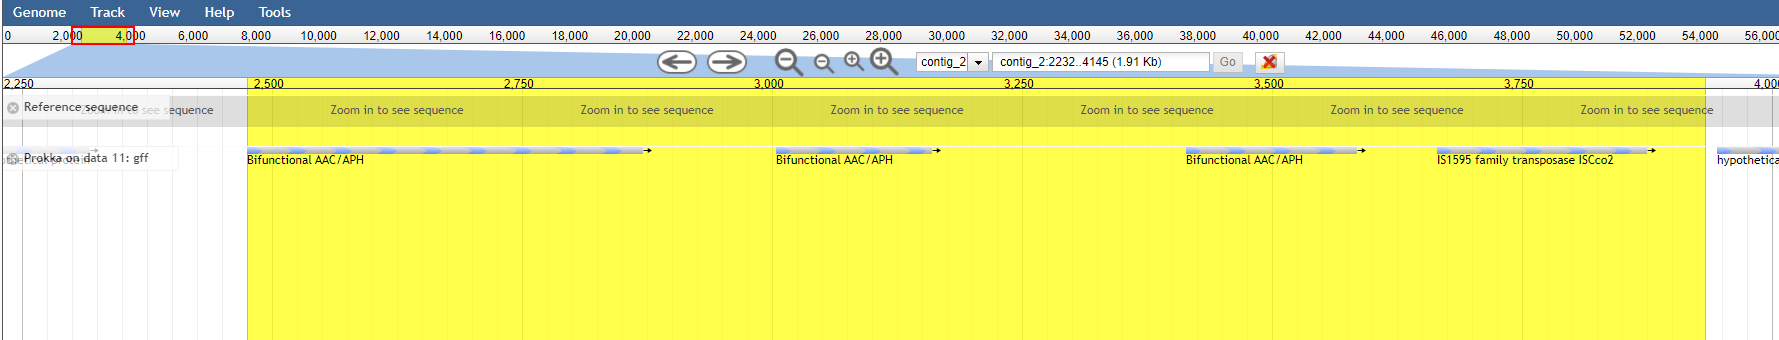 highlighted region covering multiple genes in jbrowse. 